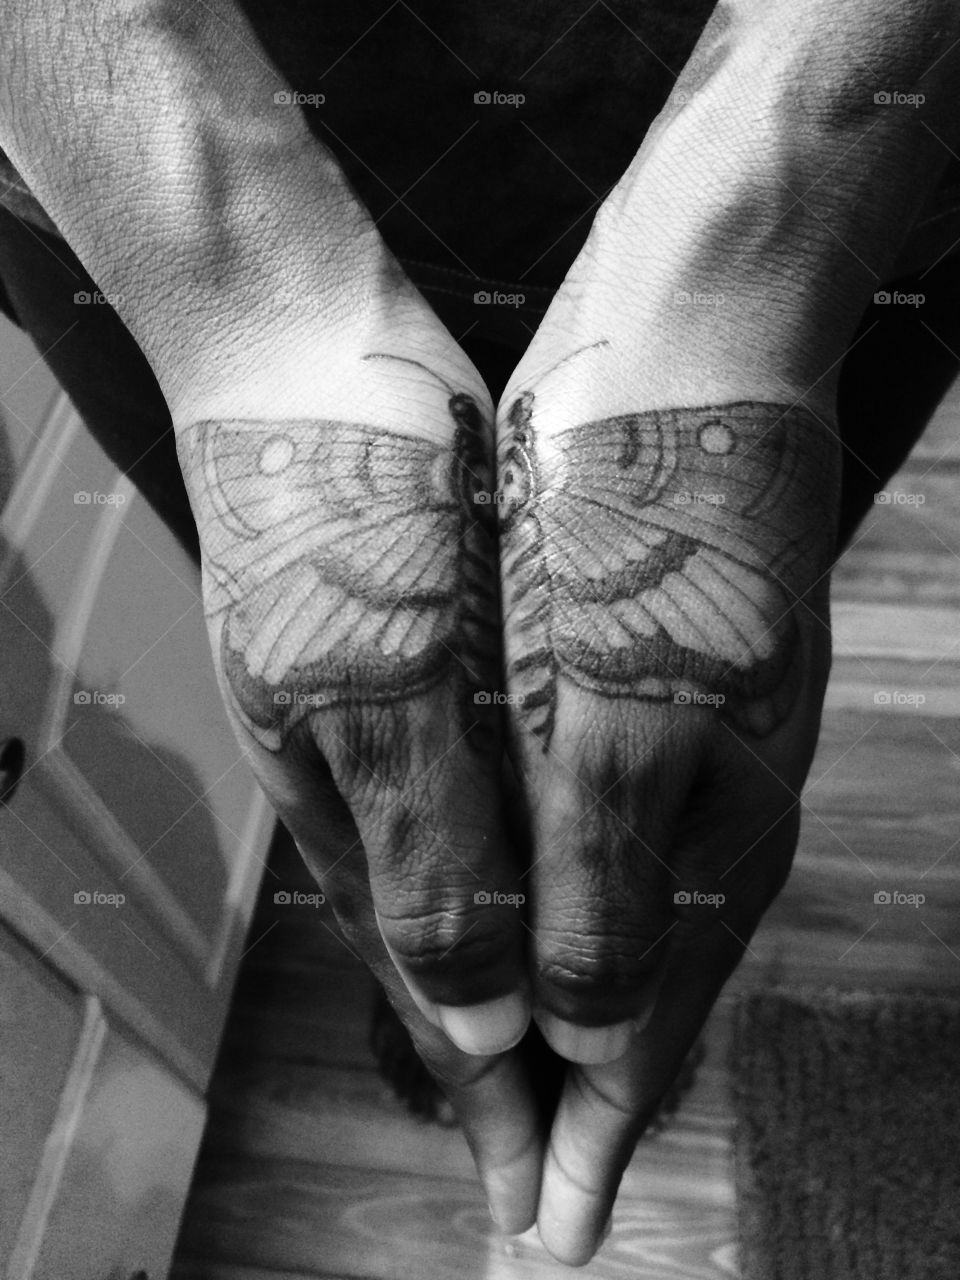 Mirror Tattoo on Hands, Death Head Moth, by Chris at Red Letter One